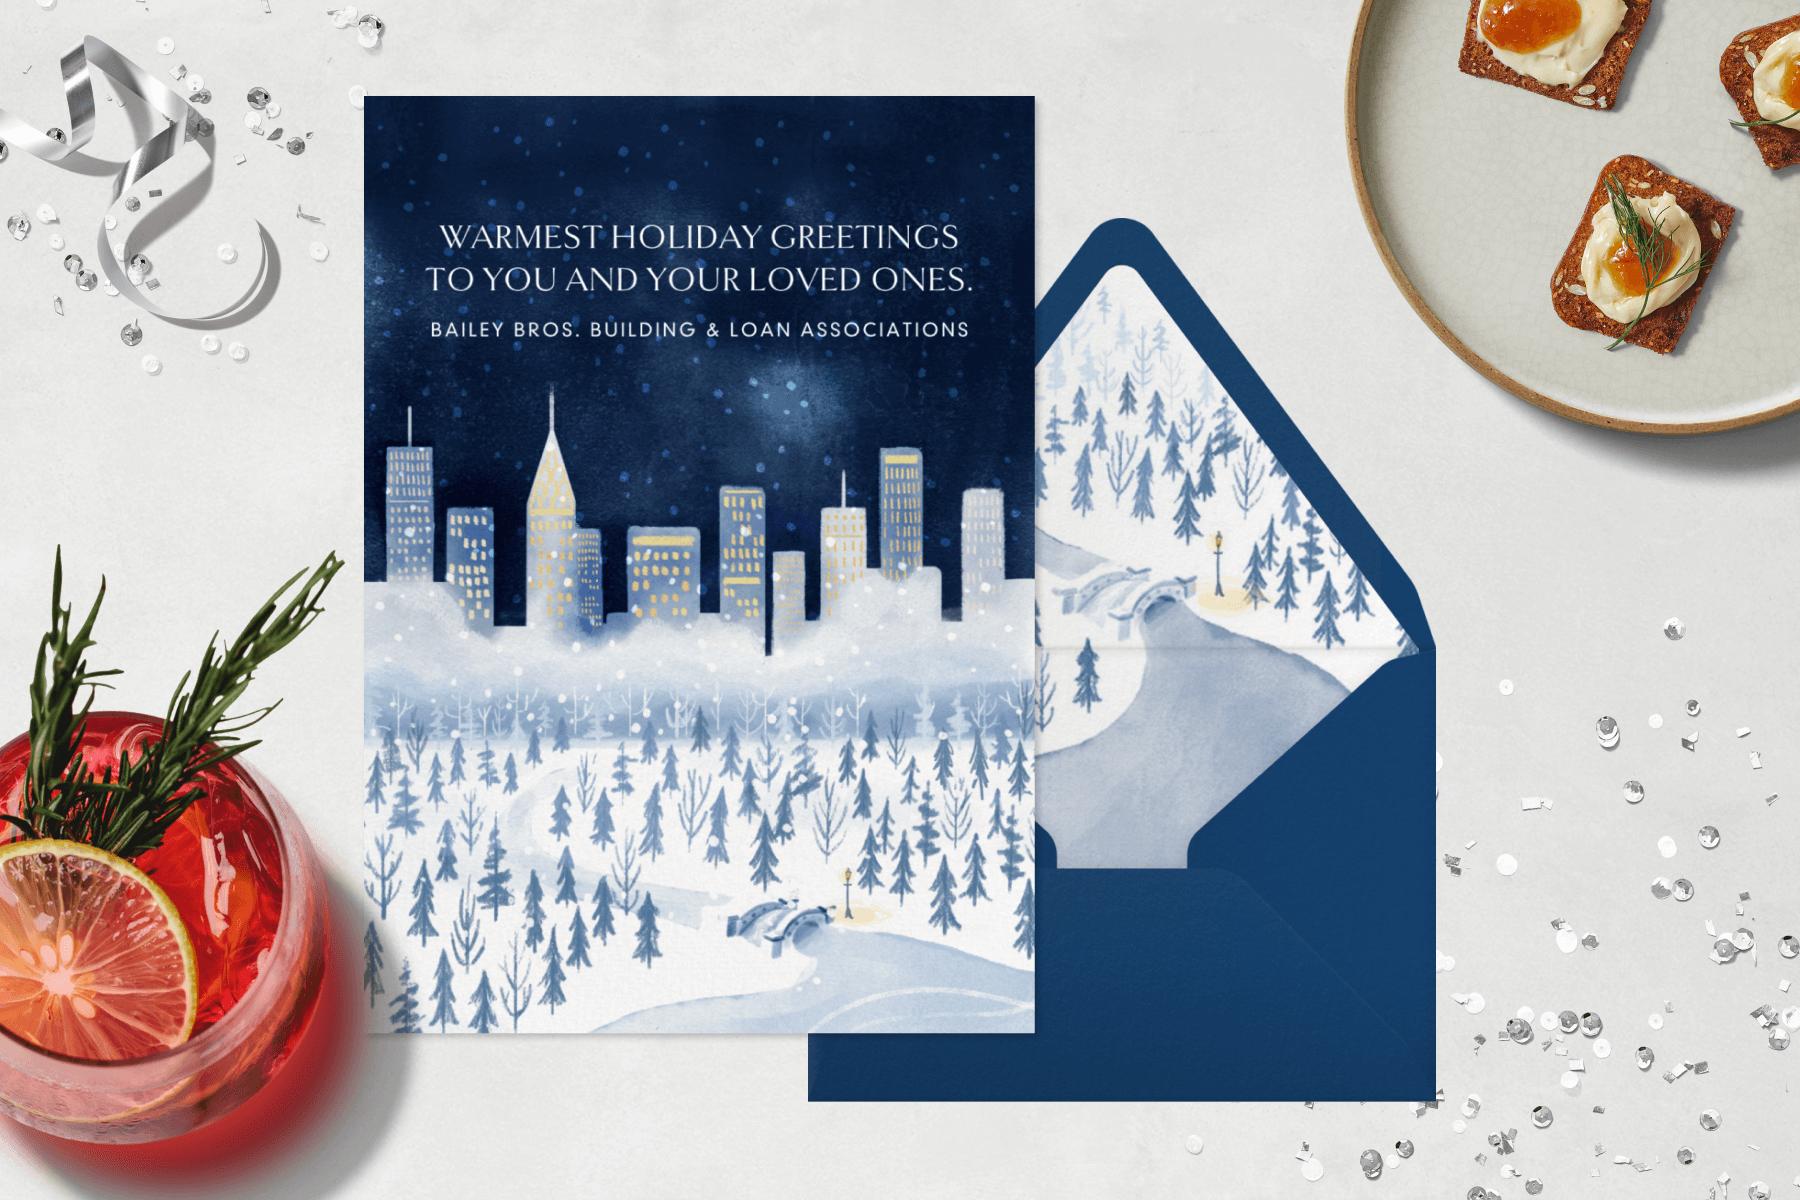 40 Business Holiday Card Messages To Spread Holiday Cheer